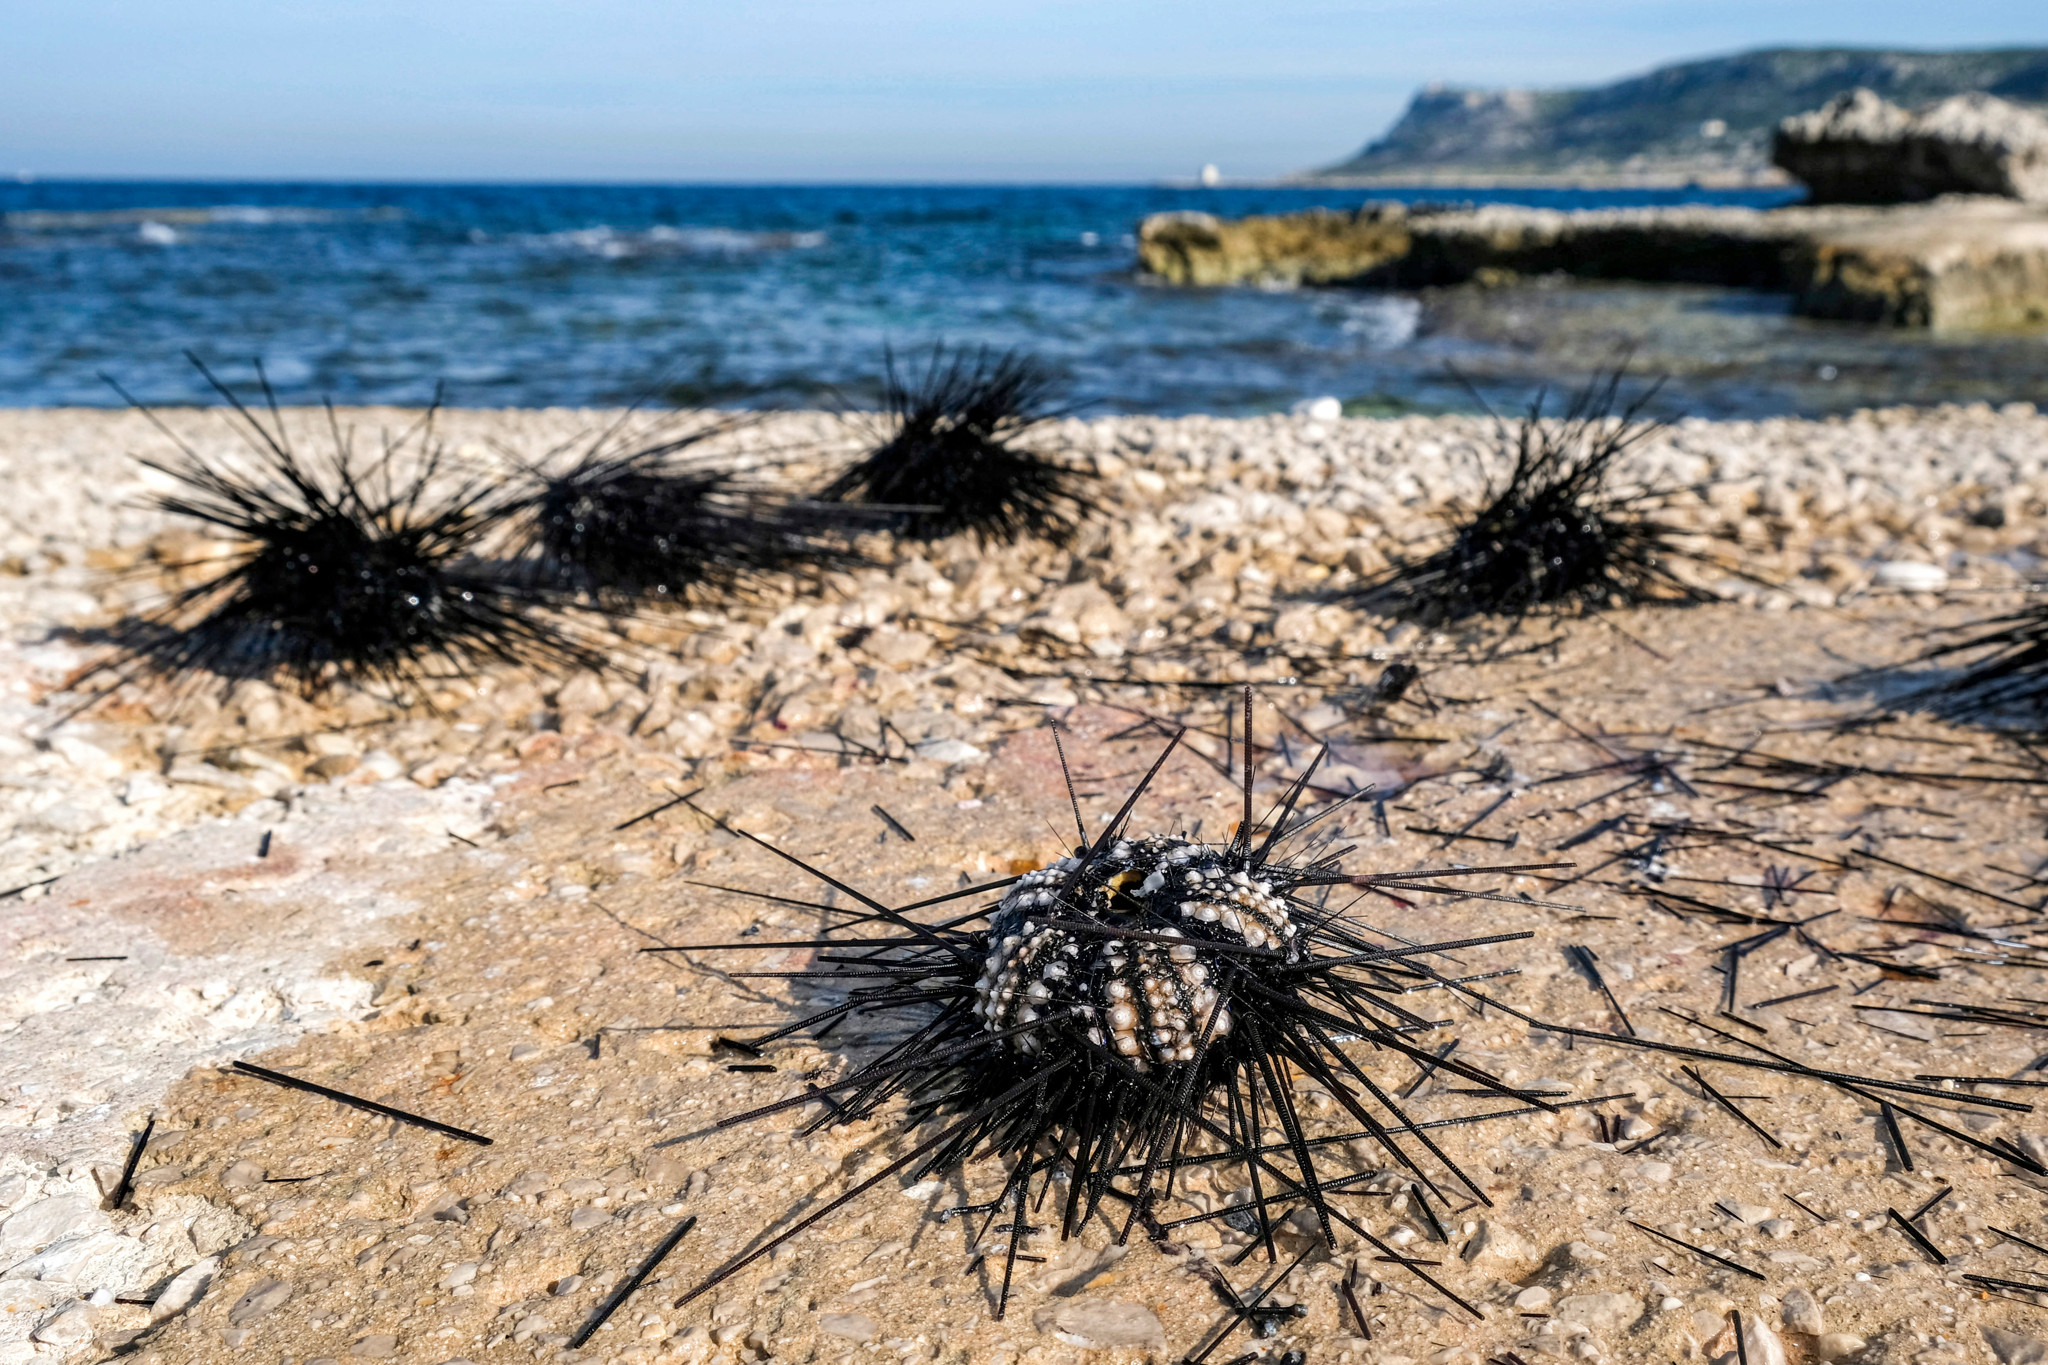 Dying long-spined sea urchins are pictured on the shore of Lebanon's northern coastal city of Batroun on January 7, 2024. A parasite was found to be responsible for the massive death of long-spined sea urchins in the Red Sea's Gulf of Aqaba and off Oman during the start of summer 2023, and was suspected to spread to the Eastern Mediterranean thus wiping out all long-spined Diadema sea urchins which feed on algae and protect coral reefs from outgrowing algal blooms. (Photo by Ibrahim CHALHOUB / AFP)